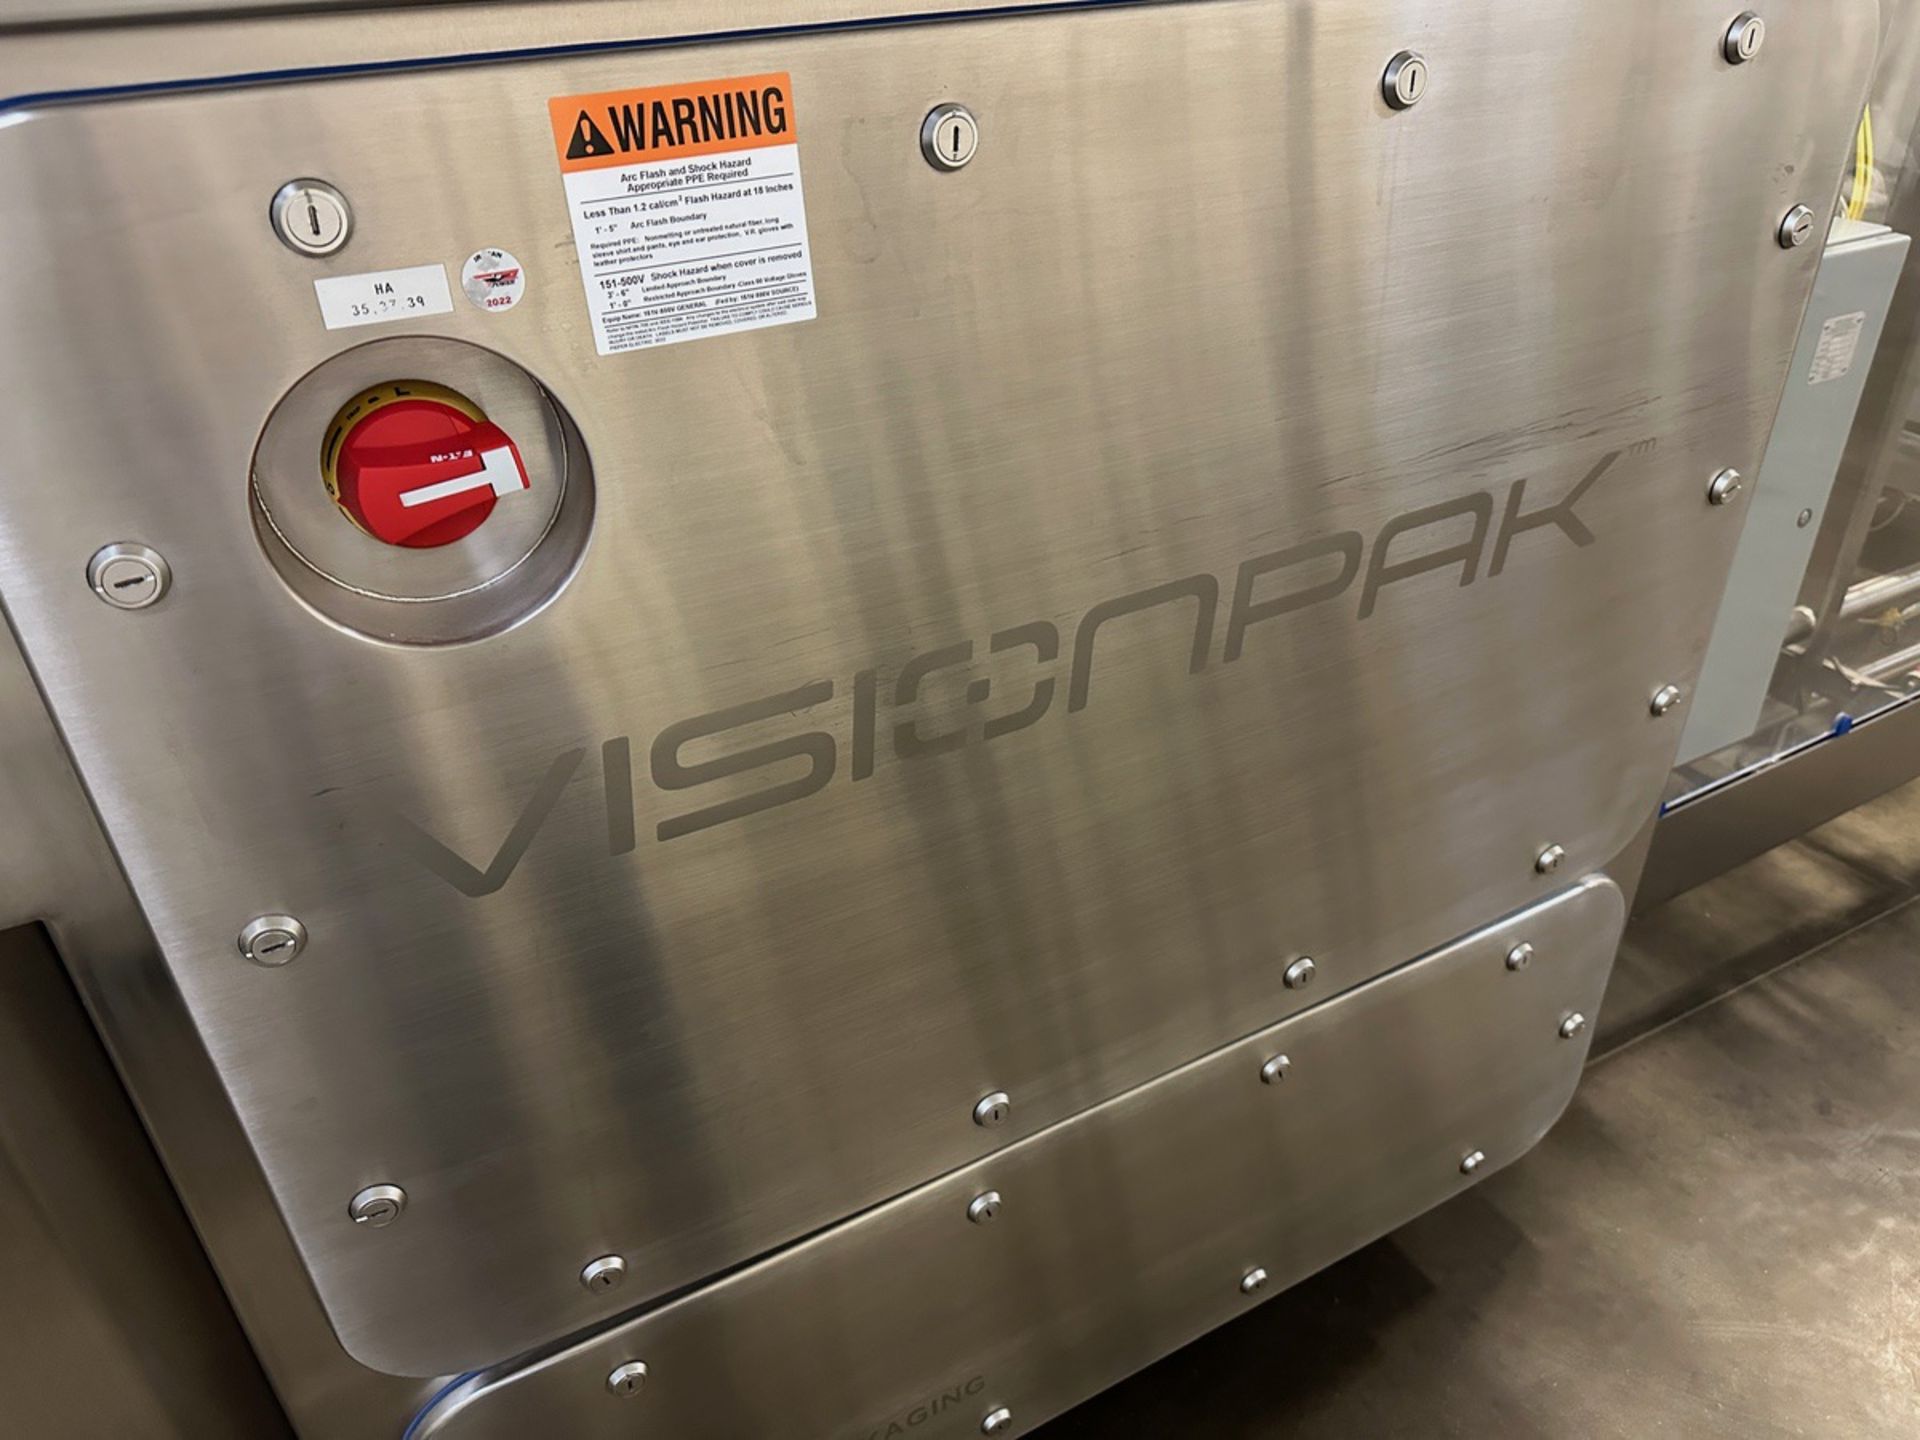 VisionPak VP 125 Film Wrapping Machine with Sealstrip Winders | Rig Fee $4500 - Image 10 of 21